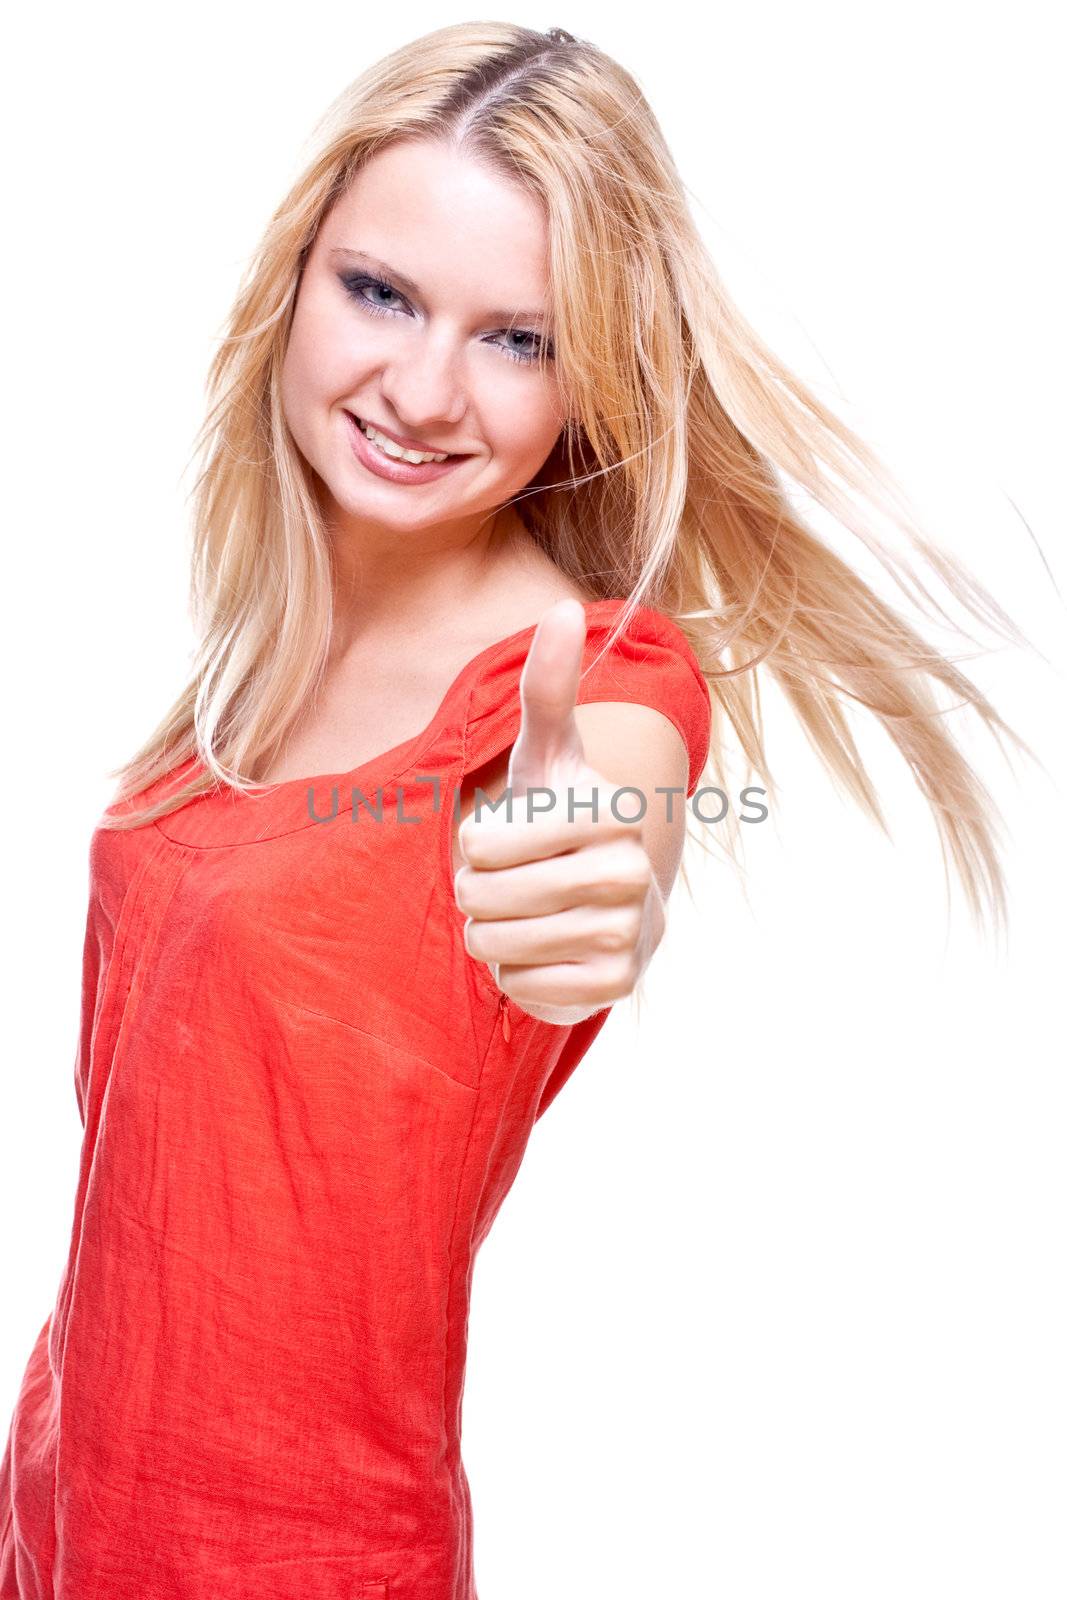 beautiful woman in a red dress on a white background isolated